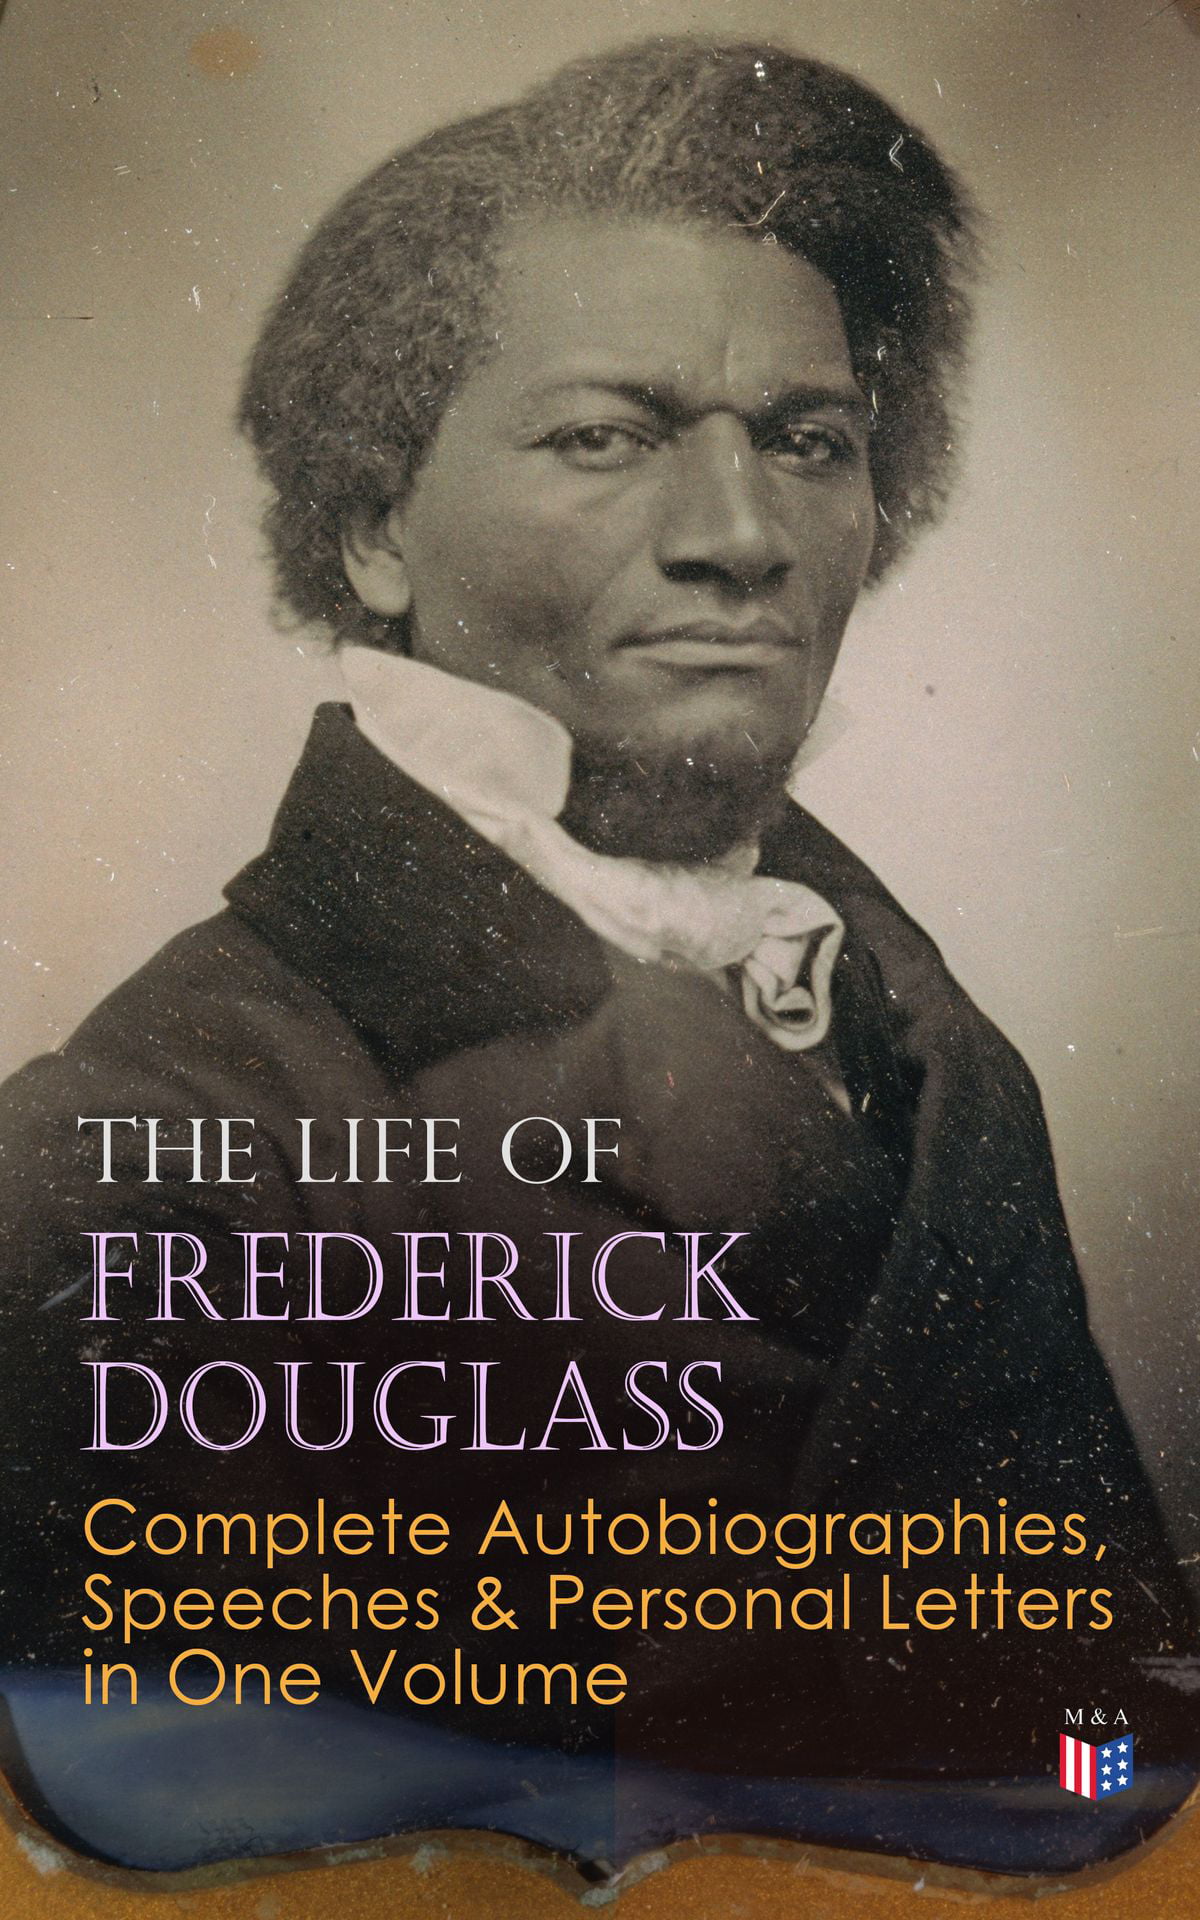 biography of frederick douglass sparknotes